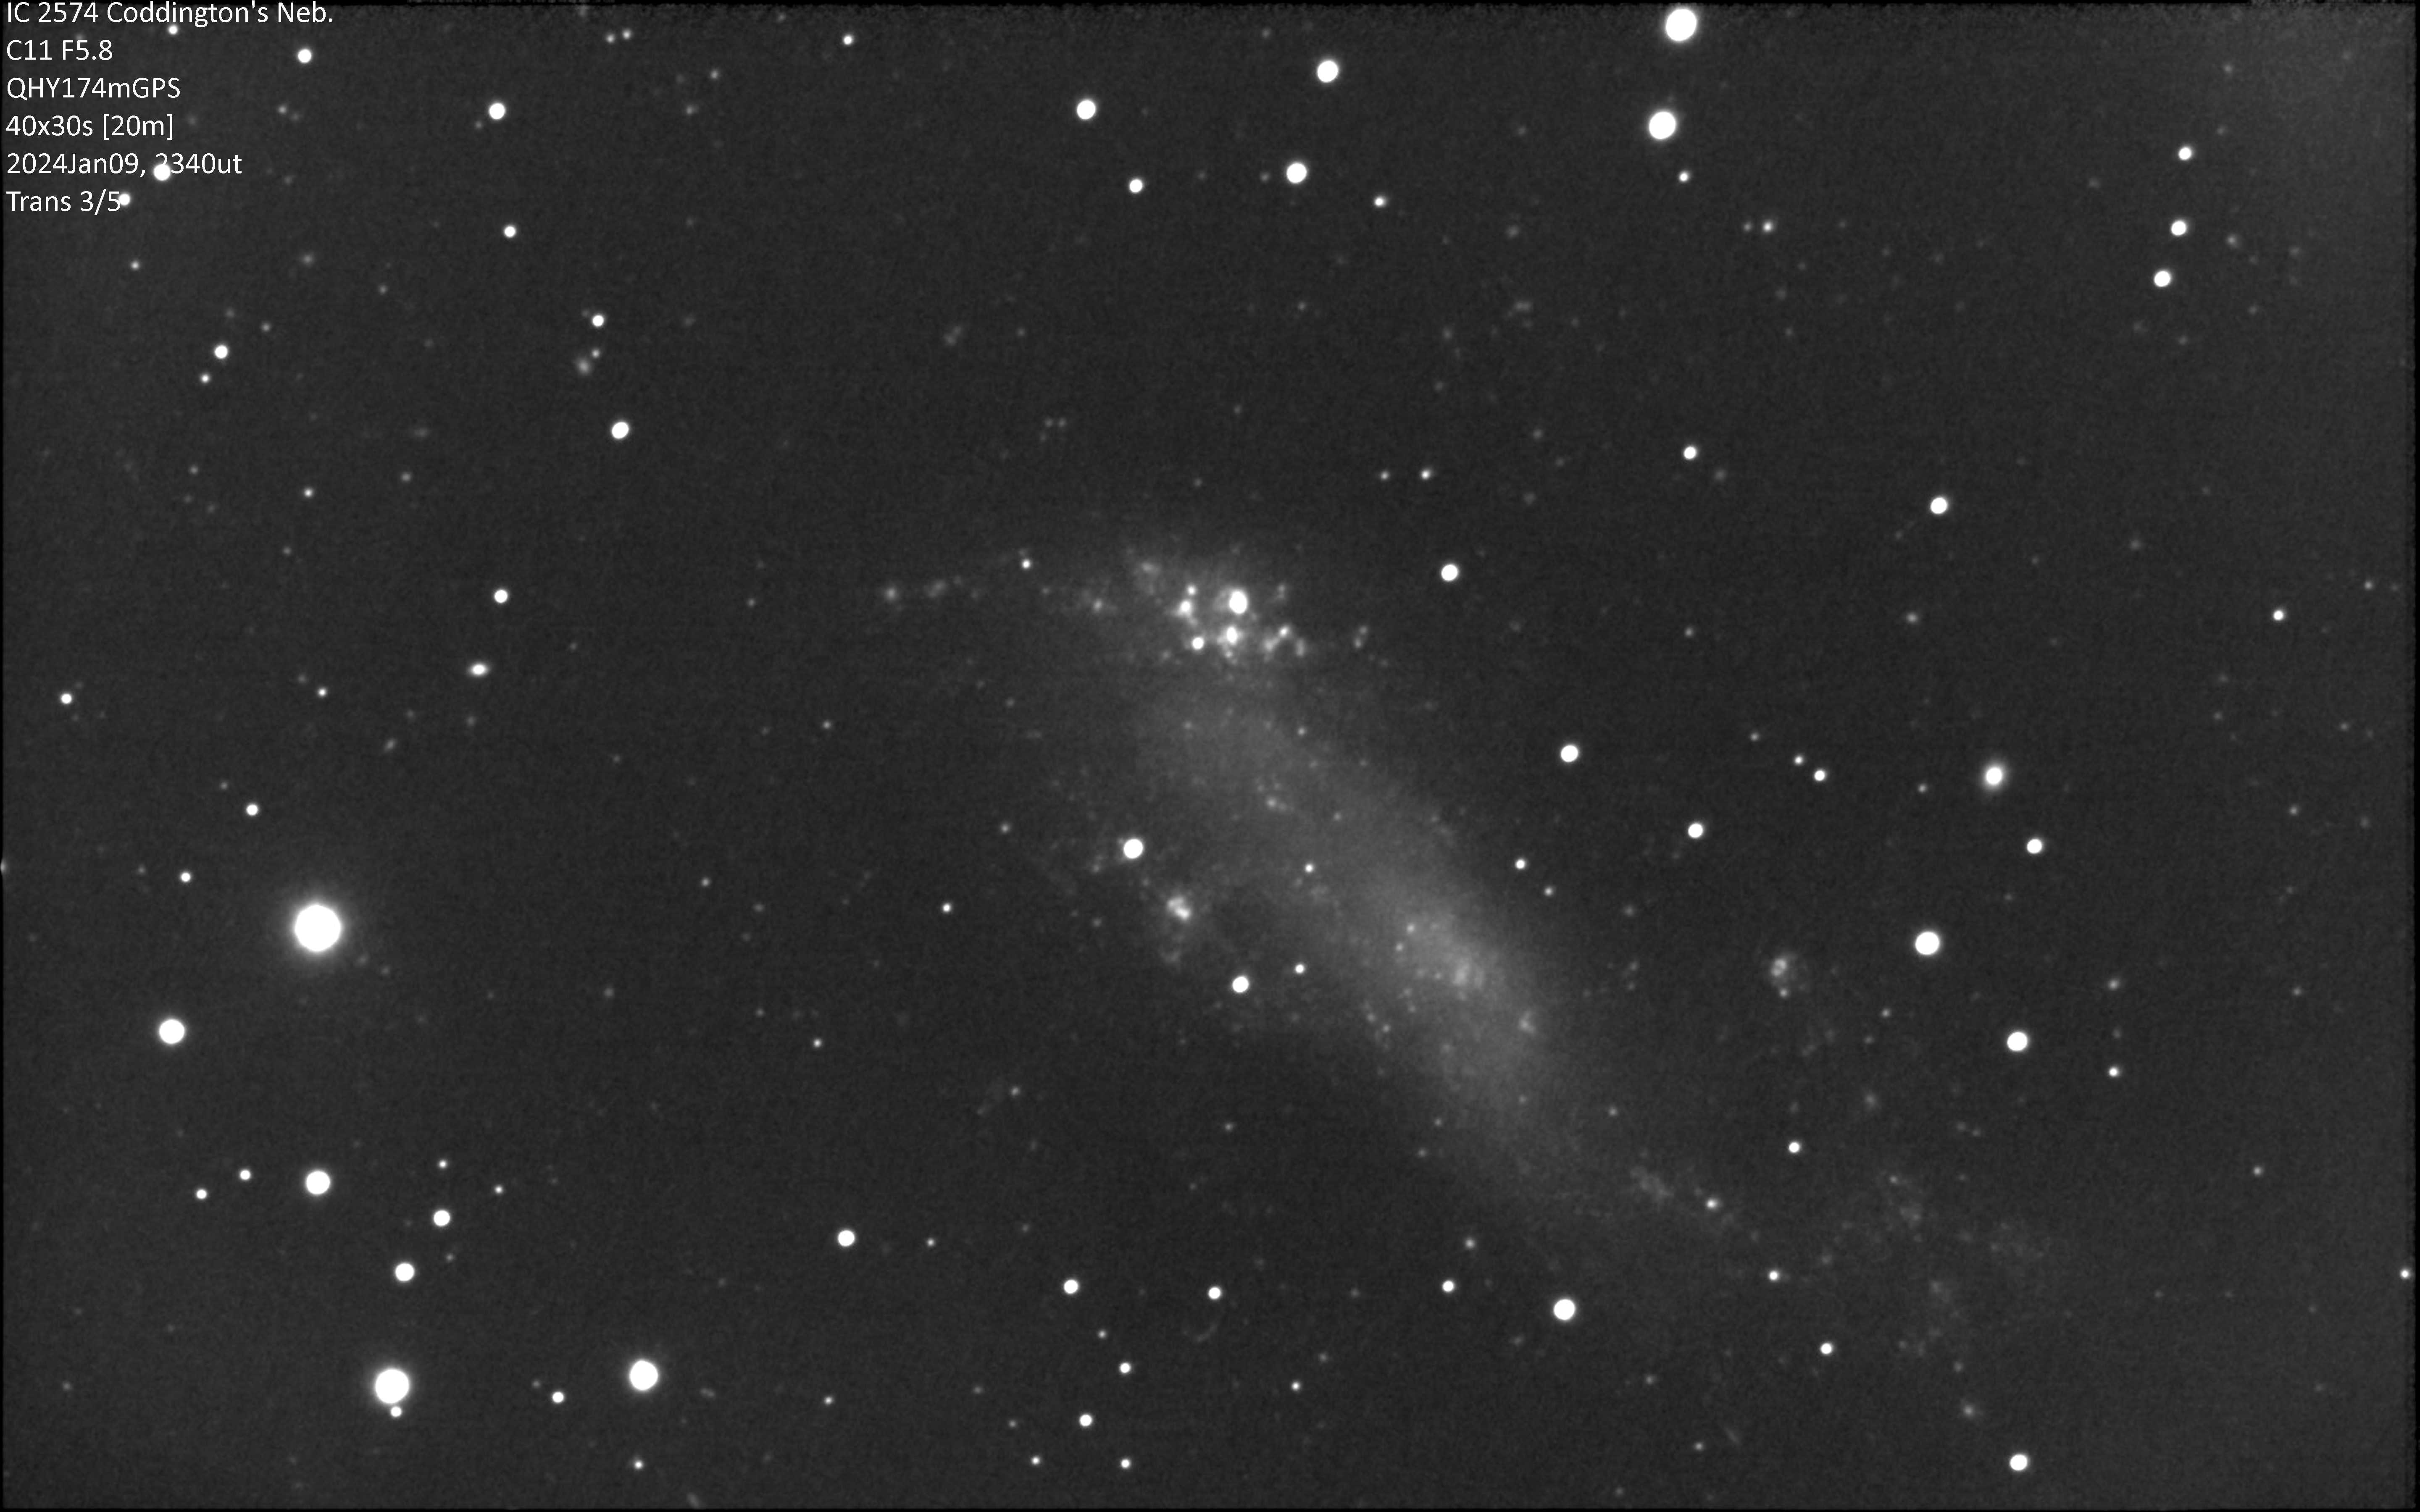 https://britastro.org/observations/observation.php?id=20240113_190404_f98dd93b31a8ee3f